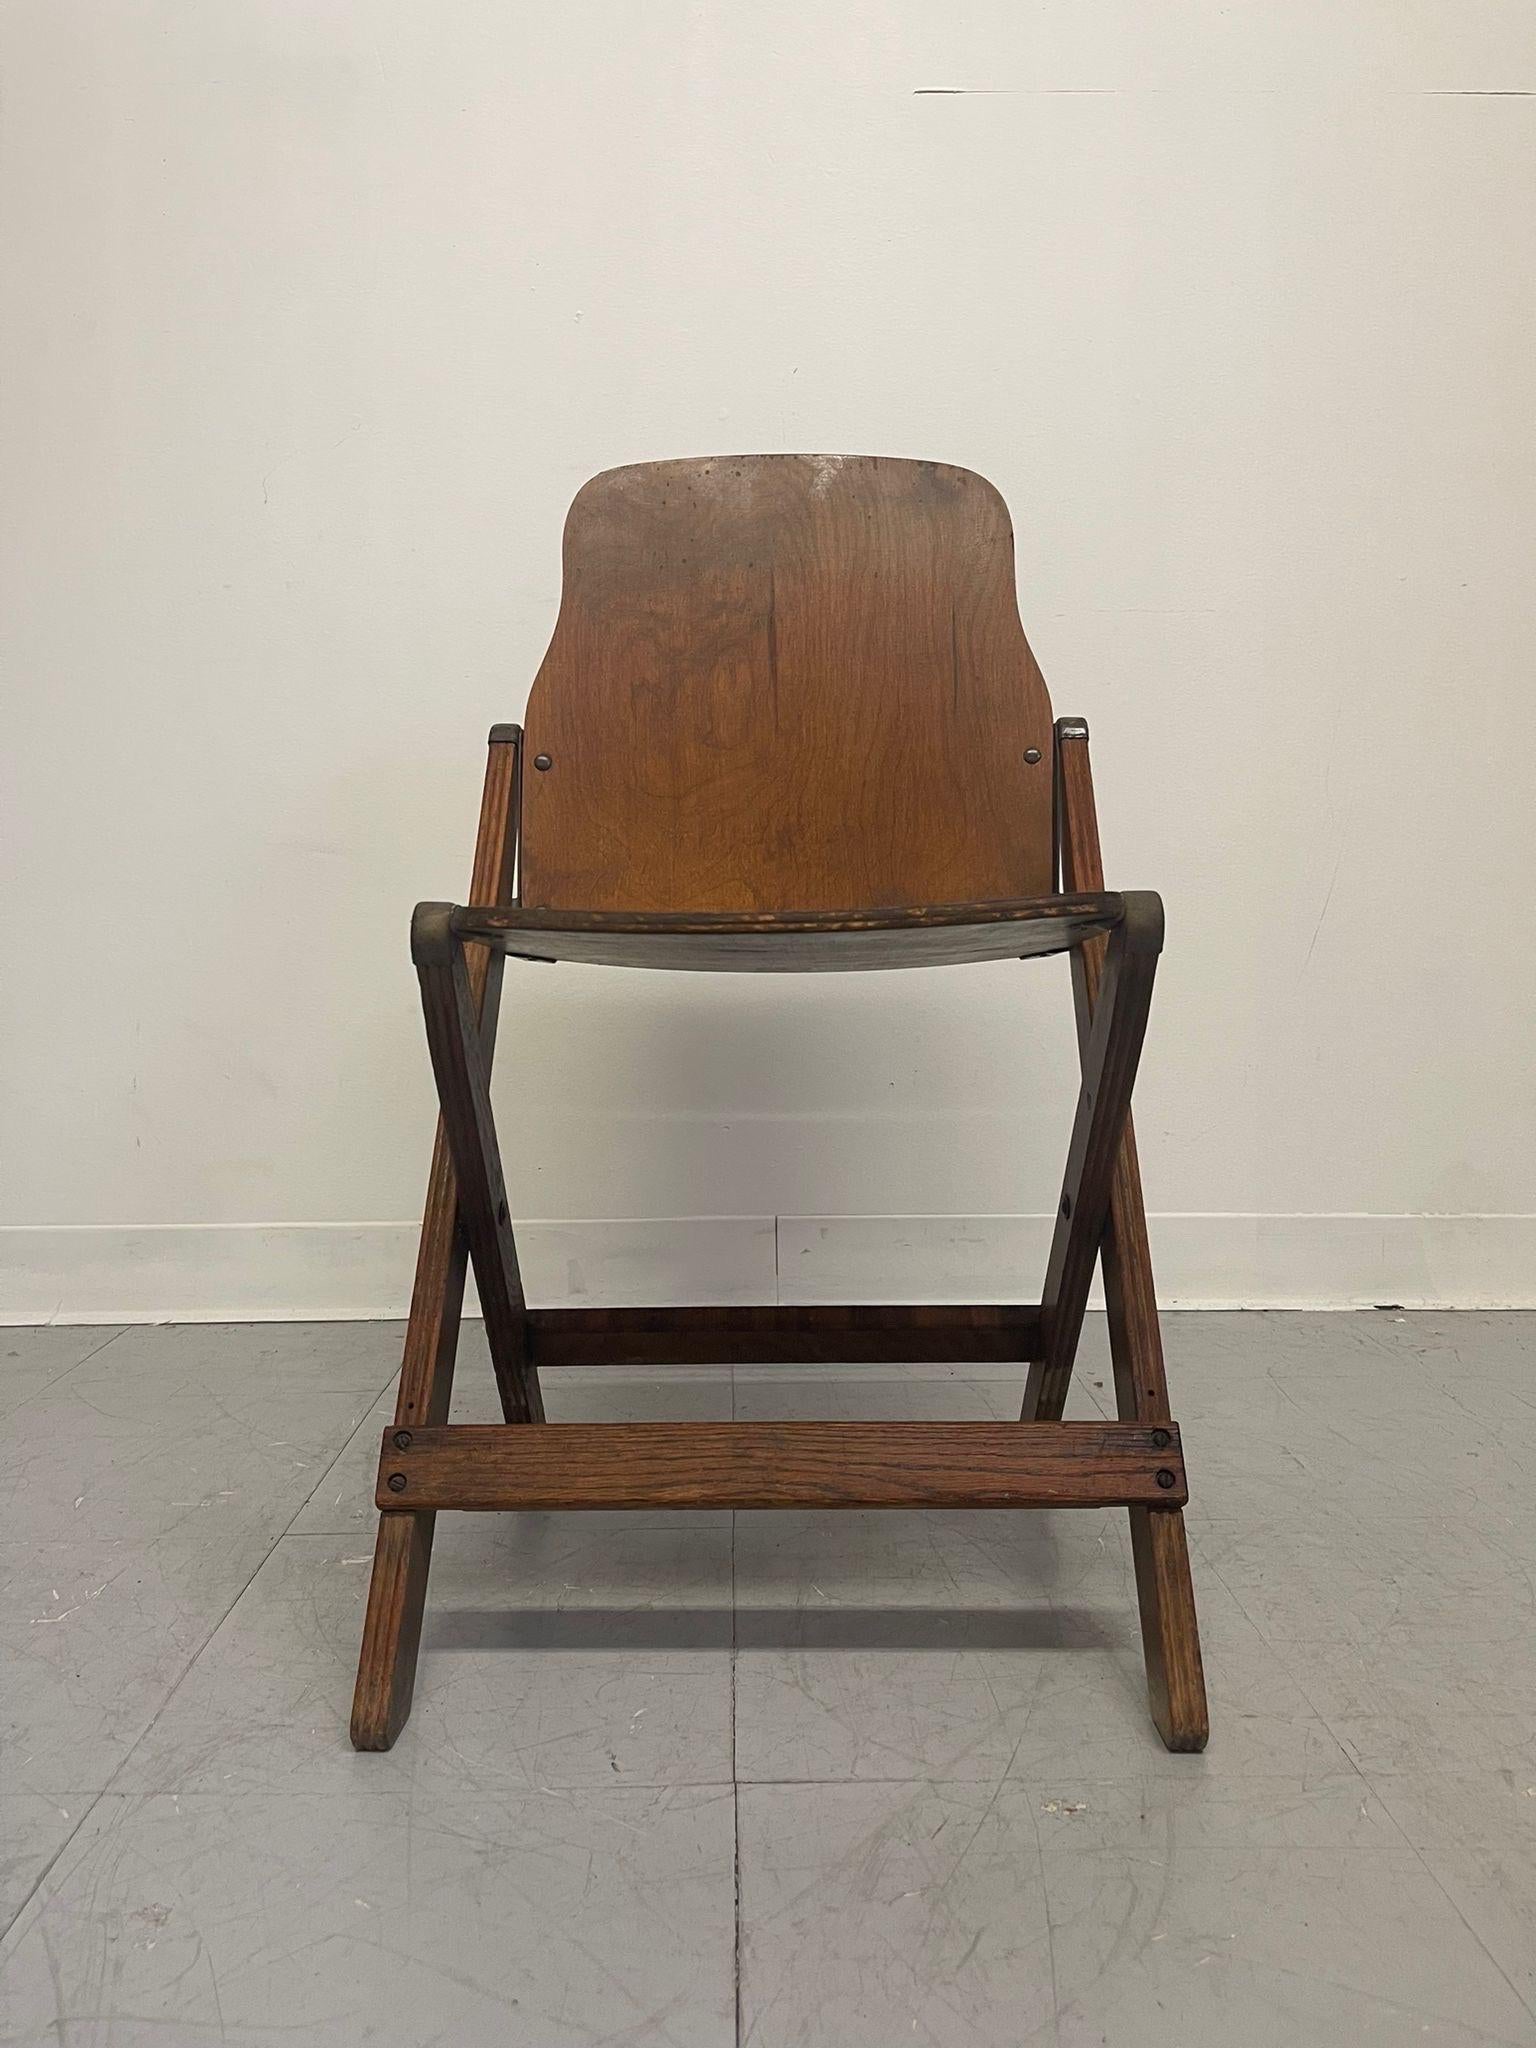 Vintage American Seating Company Folding Chair In Good Condition For Sale In Seattle, WA